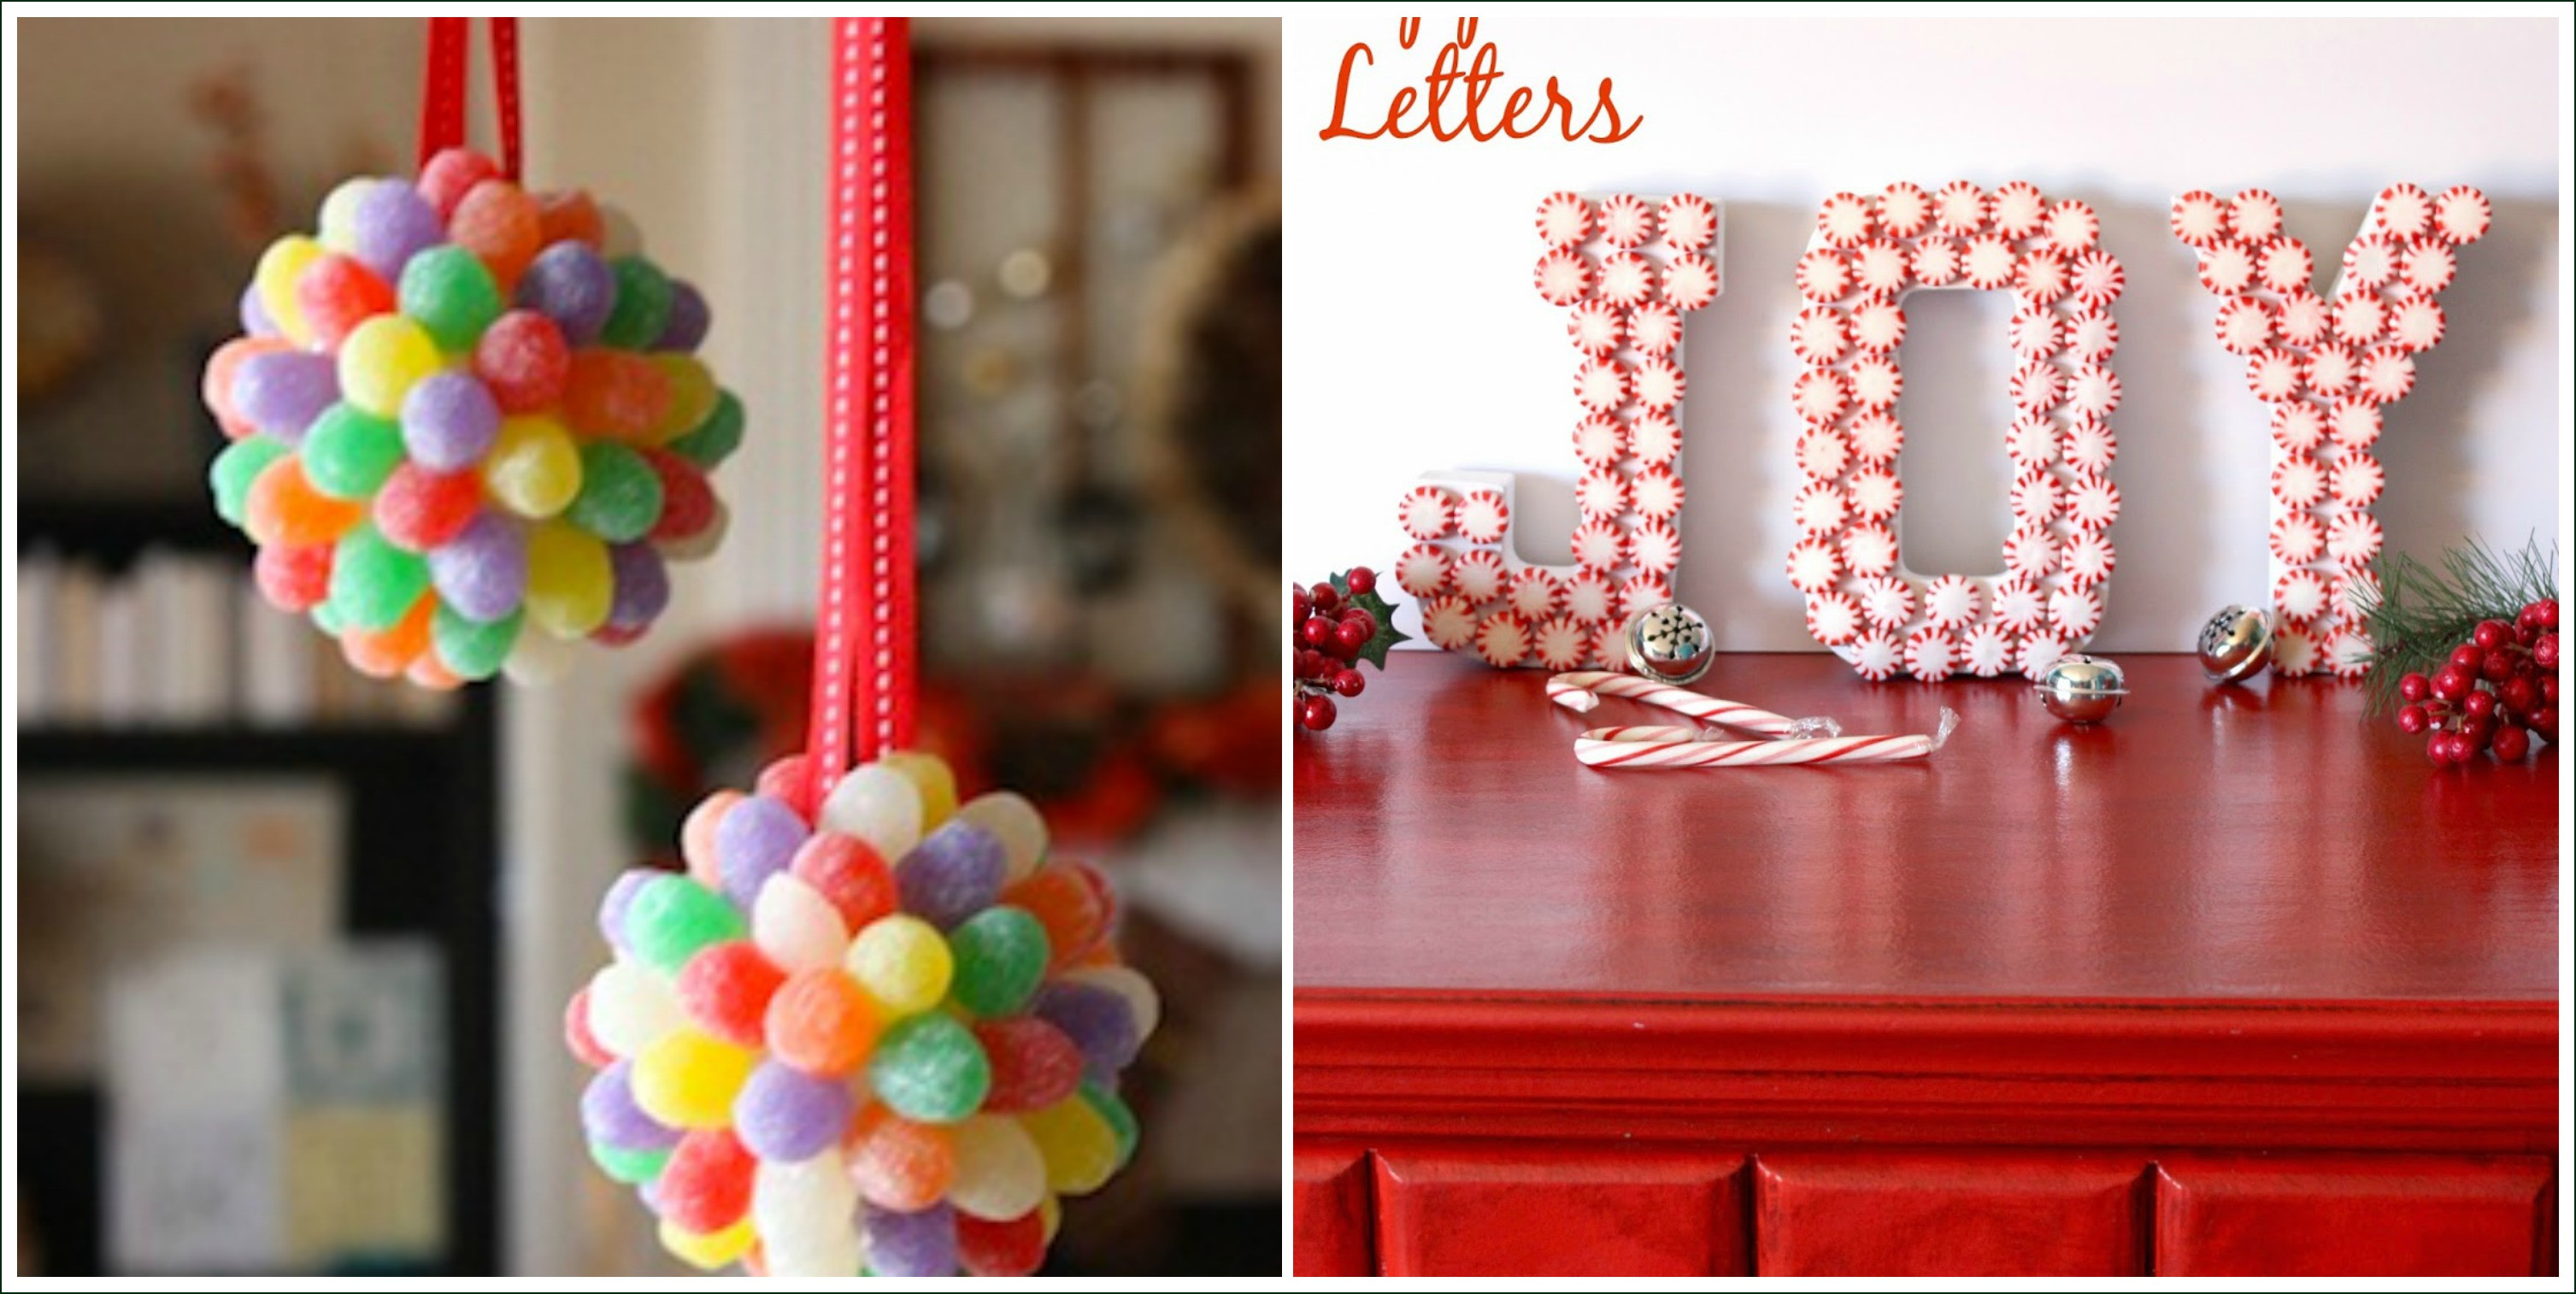 Christmas Candy Ideas
 14 Candy Christmas Decorations to Sweeten Your Home